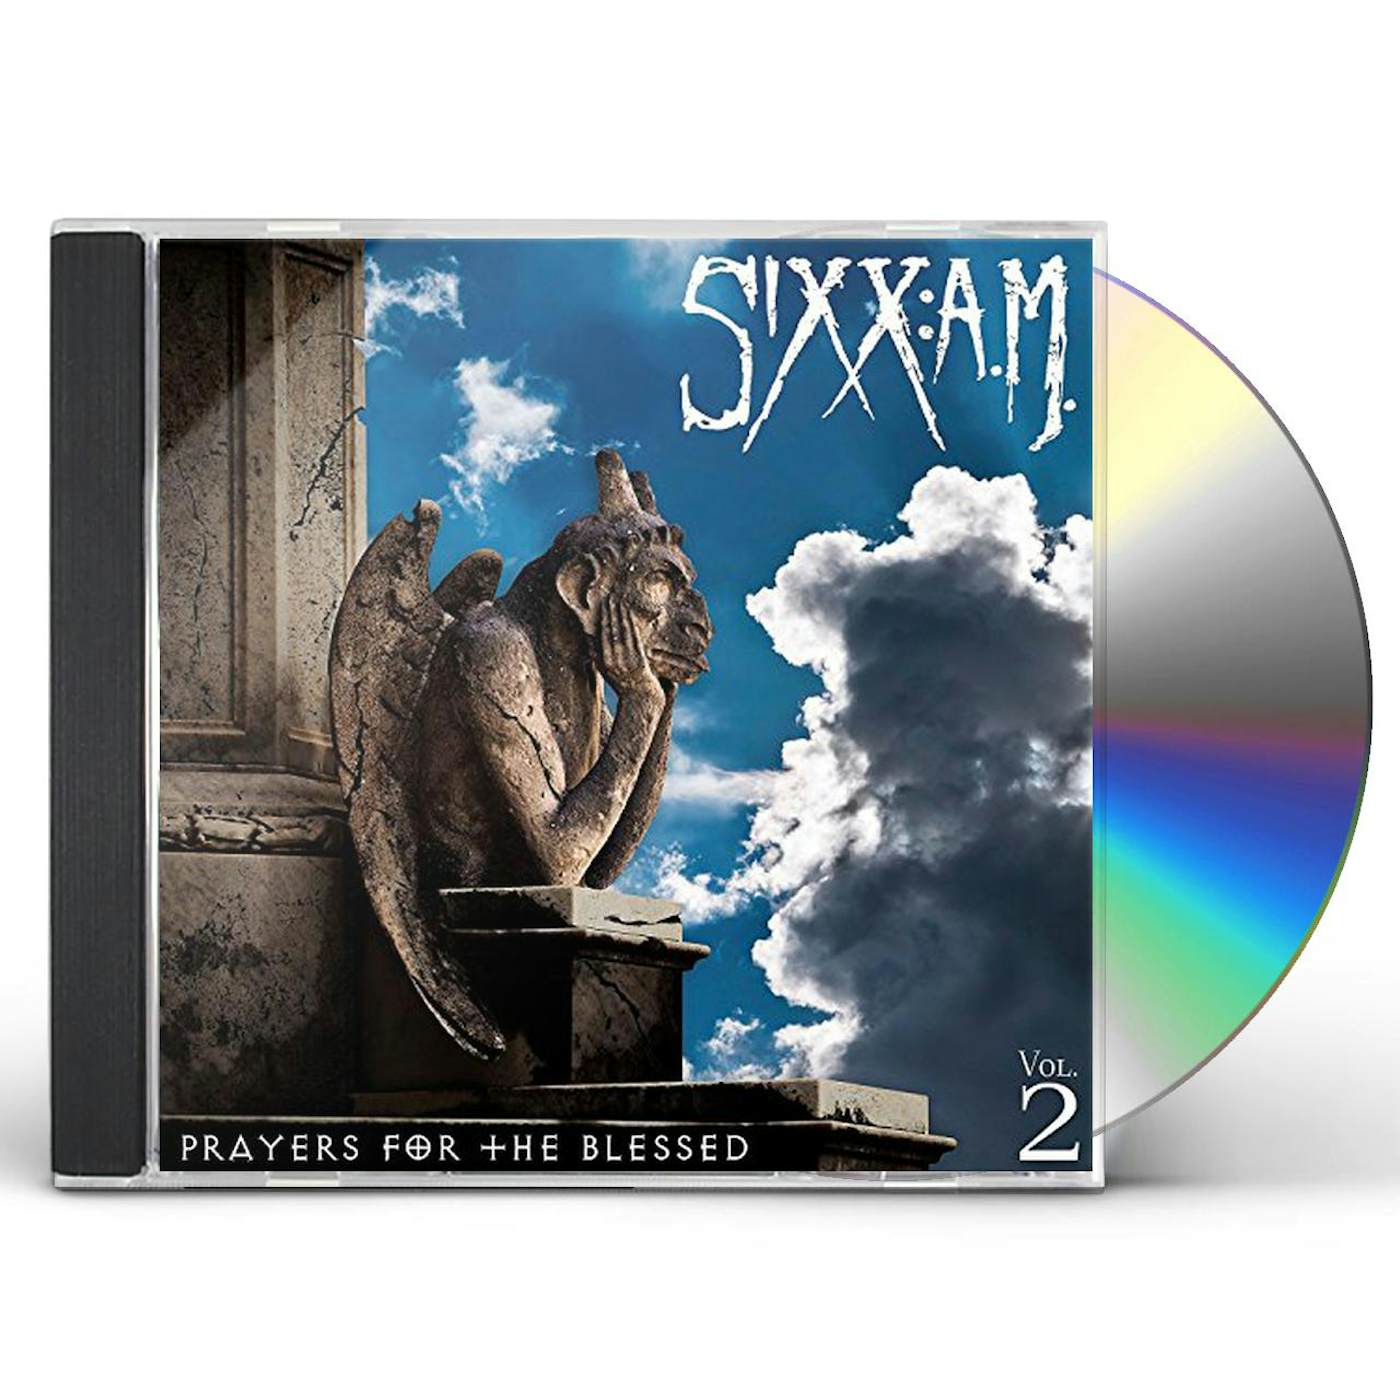 Sixx:A.M. PRAYERS FOR THE BLESSED CD